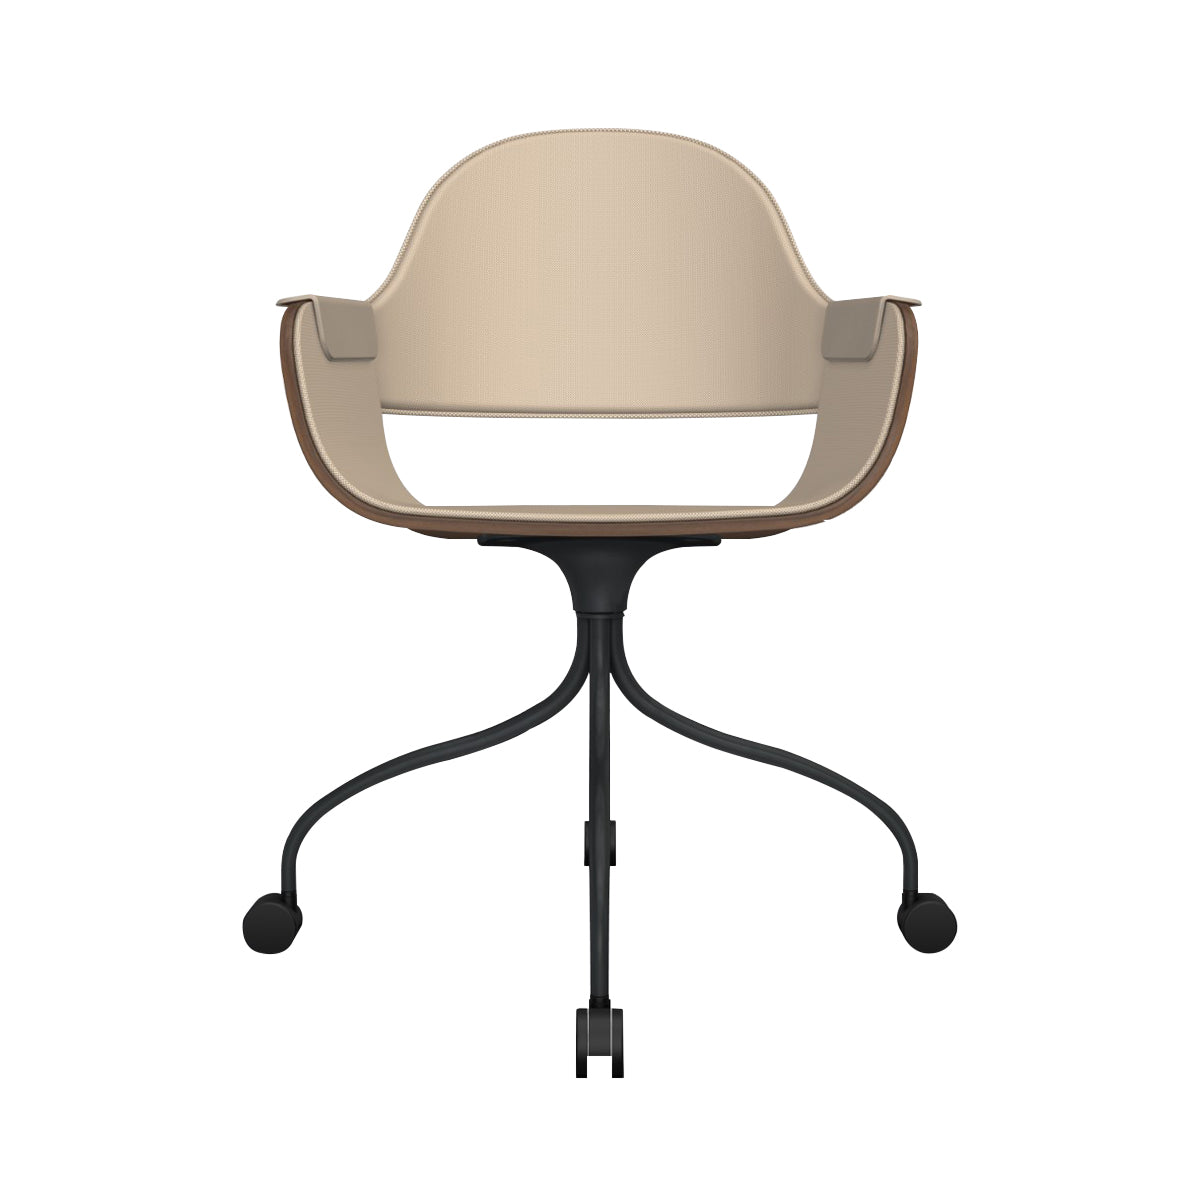 Showtime Nude Chair with Wheel: Full Upholstered + Walnut + Anthracite Grey